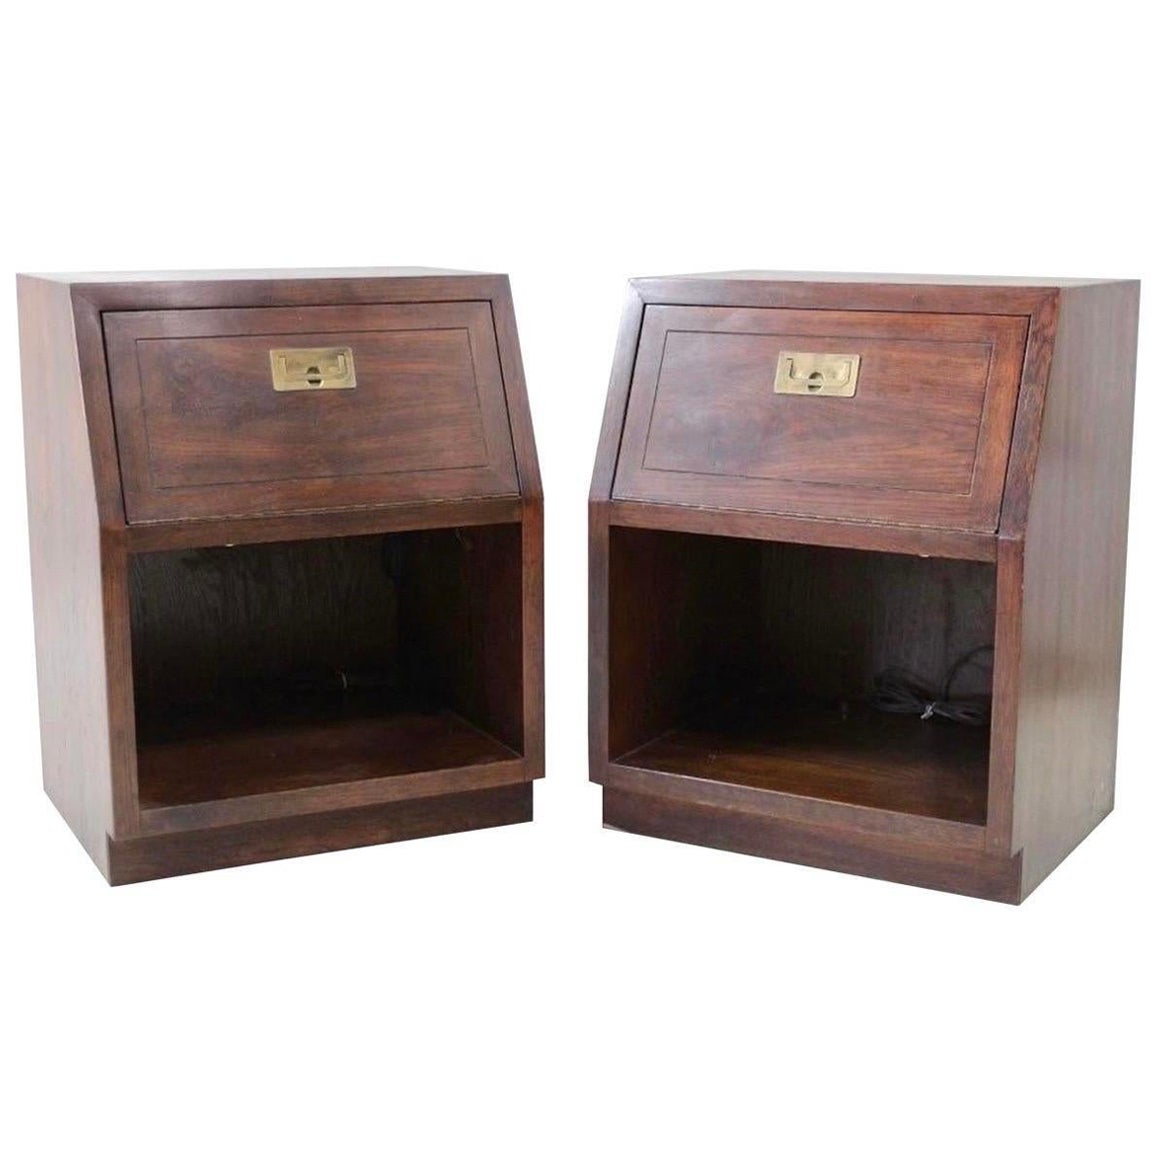 Henredon Furniture Pair of Campaign Style Midcentury End Table or Nightstands